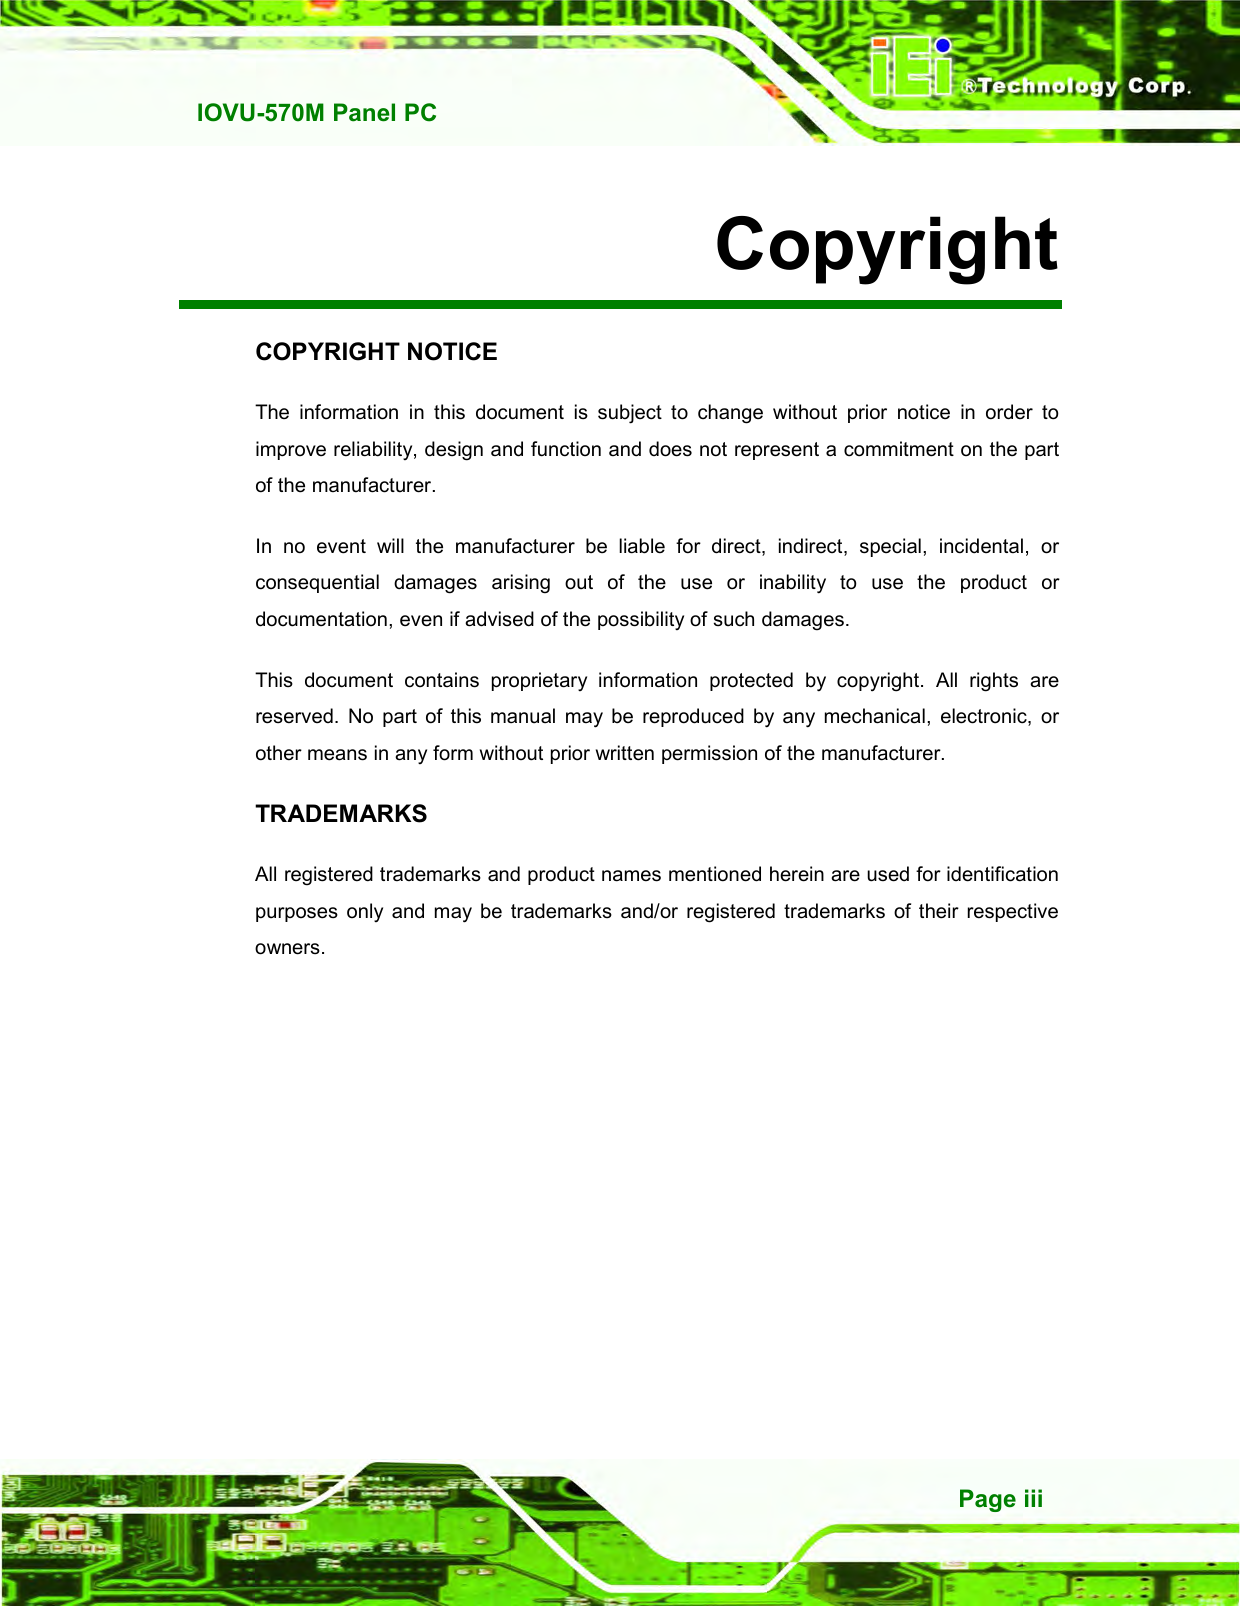   IOVU-570M Panel PC Page iii Copyright COPYRIGHT NOTICE The  information  in  this  document  is  subject  to  change  without  prior  notice  in  order  to improve reliability, design and function and does not represent a commitment on the part of the manufacturer. In  no  event  will  the  manufacturer  be  liable  for  direct,  indirect,  special,  incidental,  or consequential  damages  arising  out  of  the  use  or  inability  to  use  the  product  or documentation, even if advised of the possibility of such damages. This  document  contains  proprietary  information  protected  by  copyright.  All  rights  are reserved.  No  part  of this  manual  may  be  reproduced  by  any  mechanical,  electronic,  or other means in any form without prior written permission of the manufacturer. TRADEMARKS All registered trademarks and product names mentioned herein are used for identification purposes  only  and  may  be  trademarks  and/or  registered  trademarks  of  their  respective owners. 